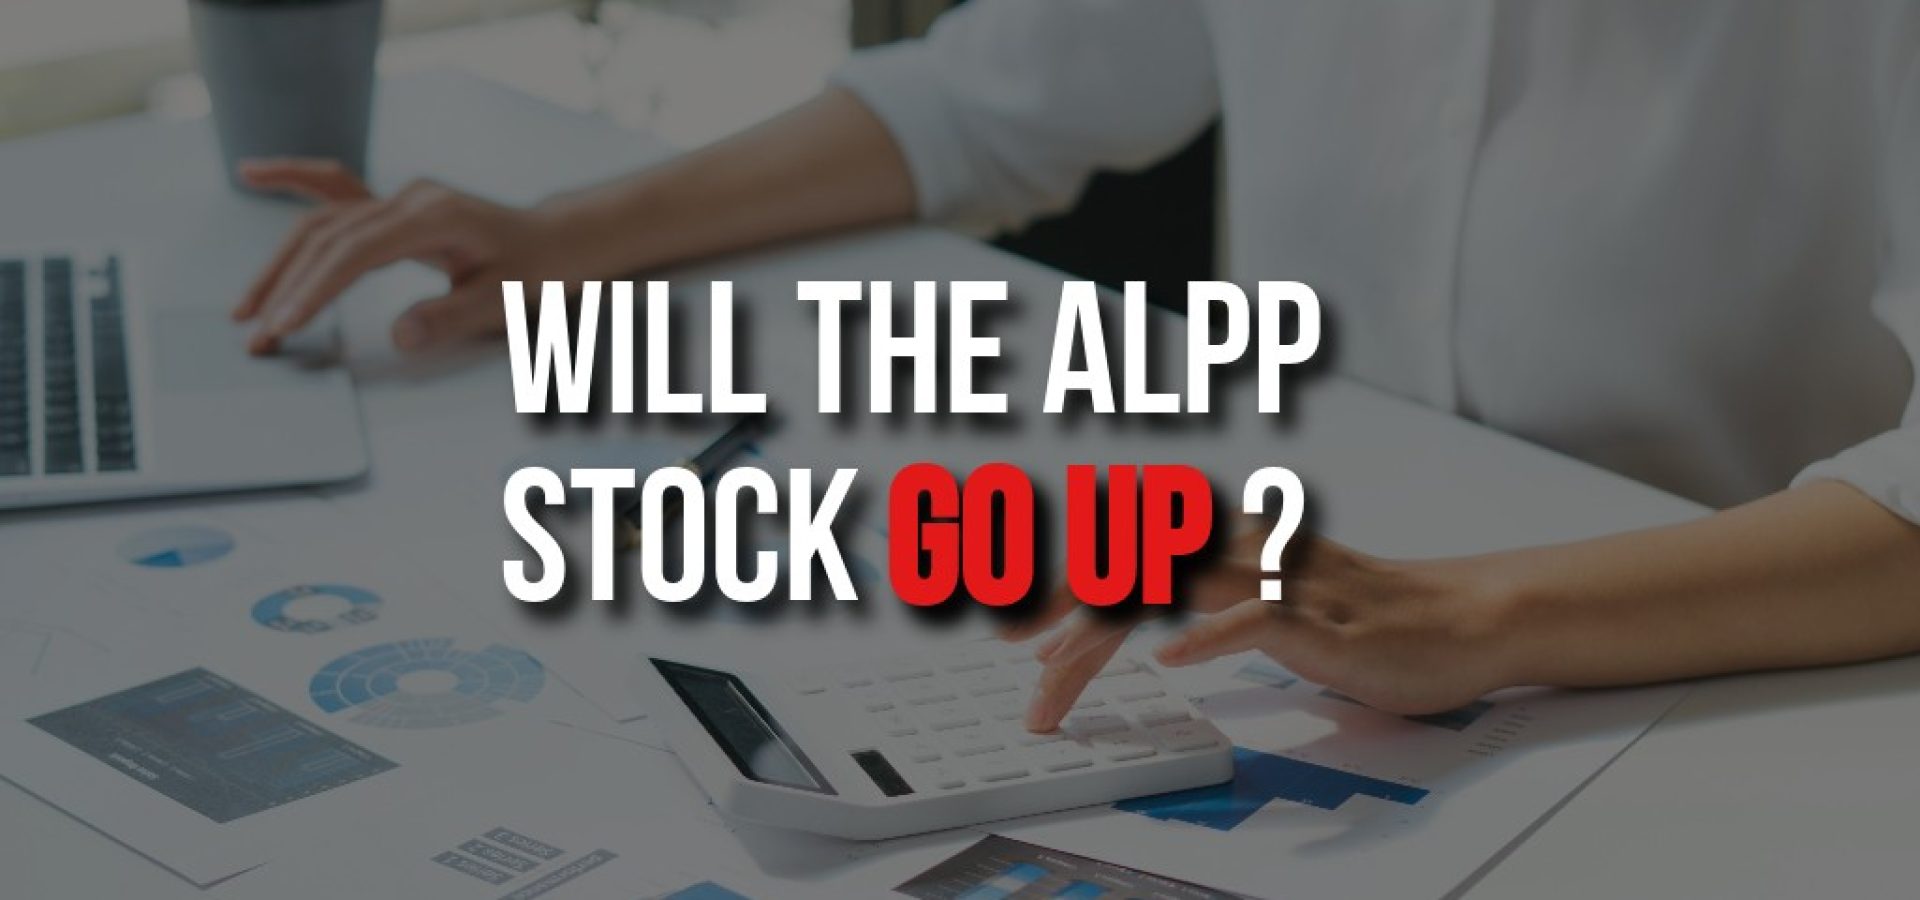 Will the ALPP stock go up - Get All The Information